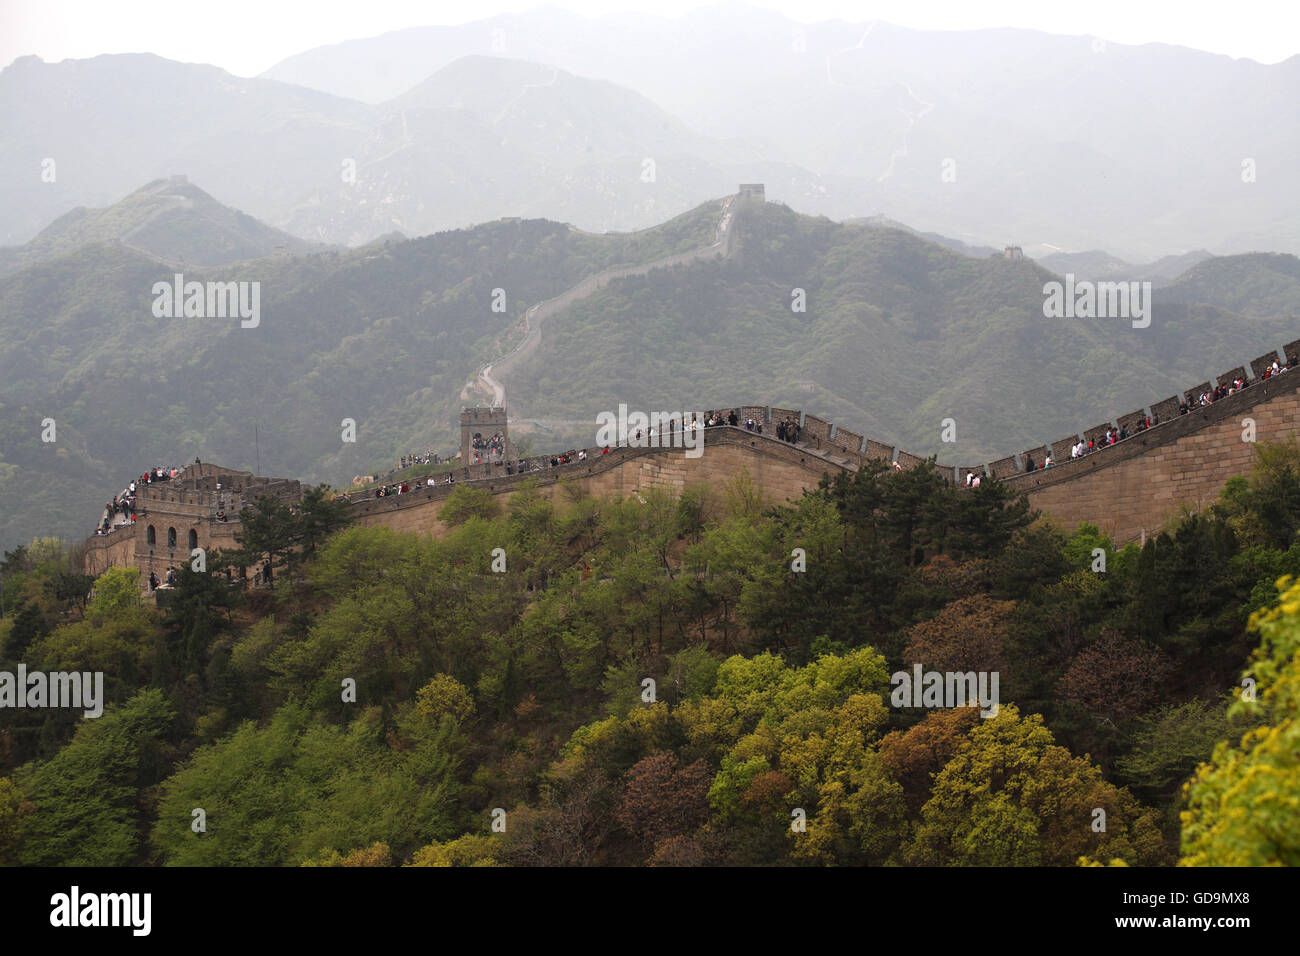 The Great Wall of China sprawls over the rugged mountains with thousands of tourists from all over the world on it. Badaling near Beijing, China. Stock Photo